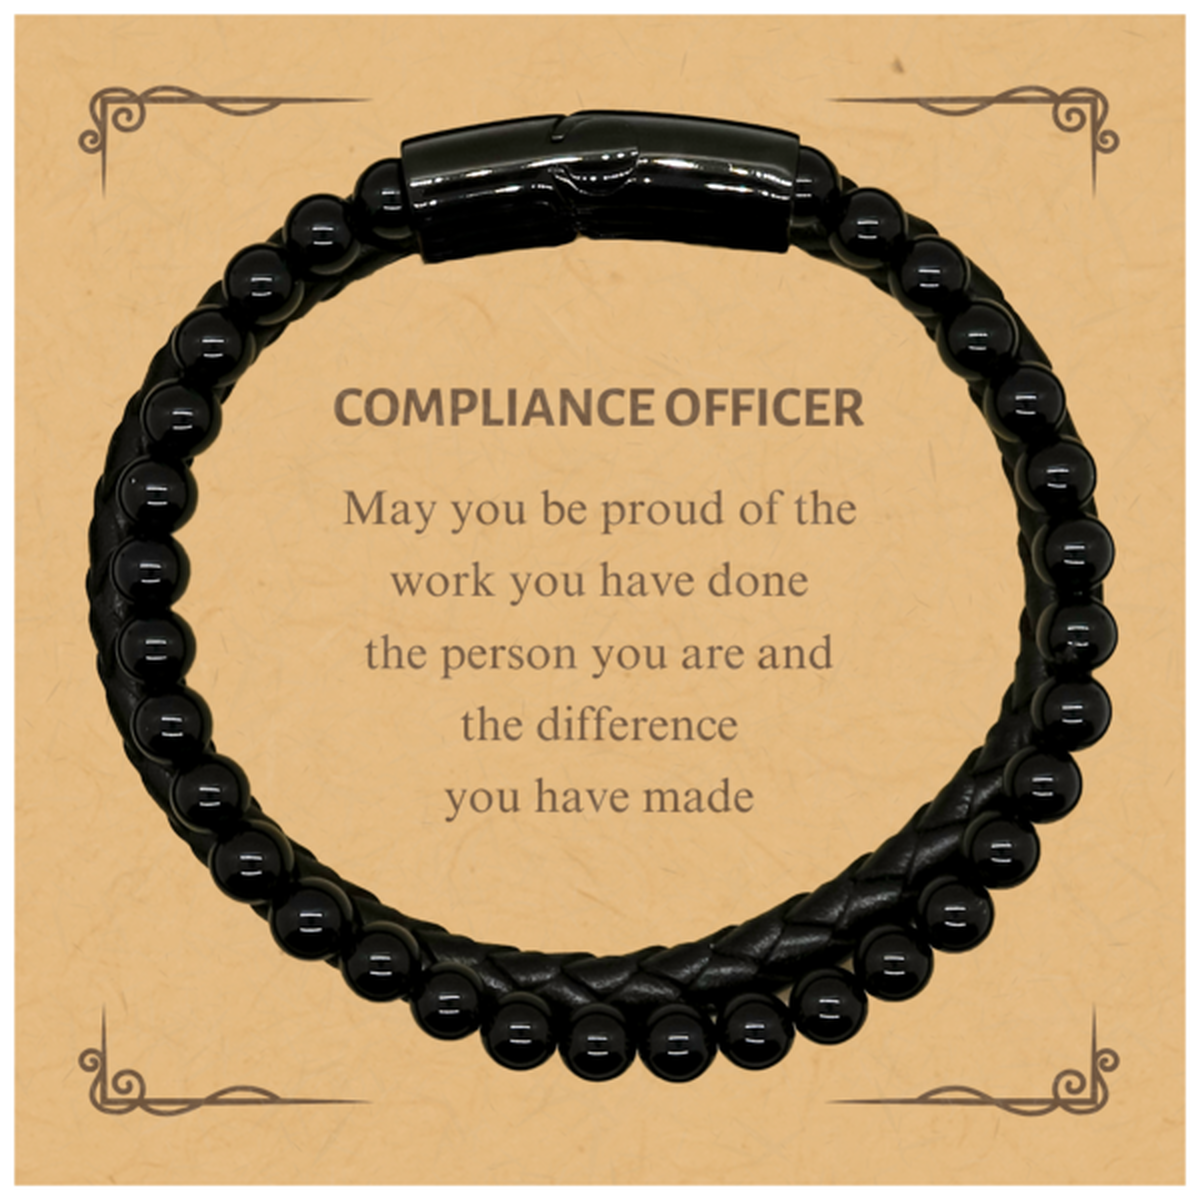 Compliance Officer May you be proud of the work you have done, Retirement Compliance Officer Stone Leather Bracelets for Colleague Appreciation Gifts Amazing for Compliance Officer